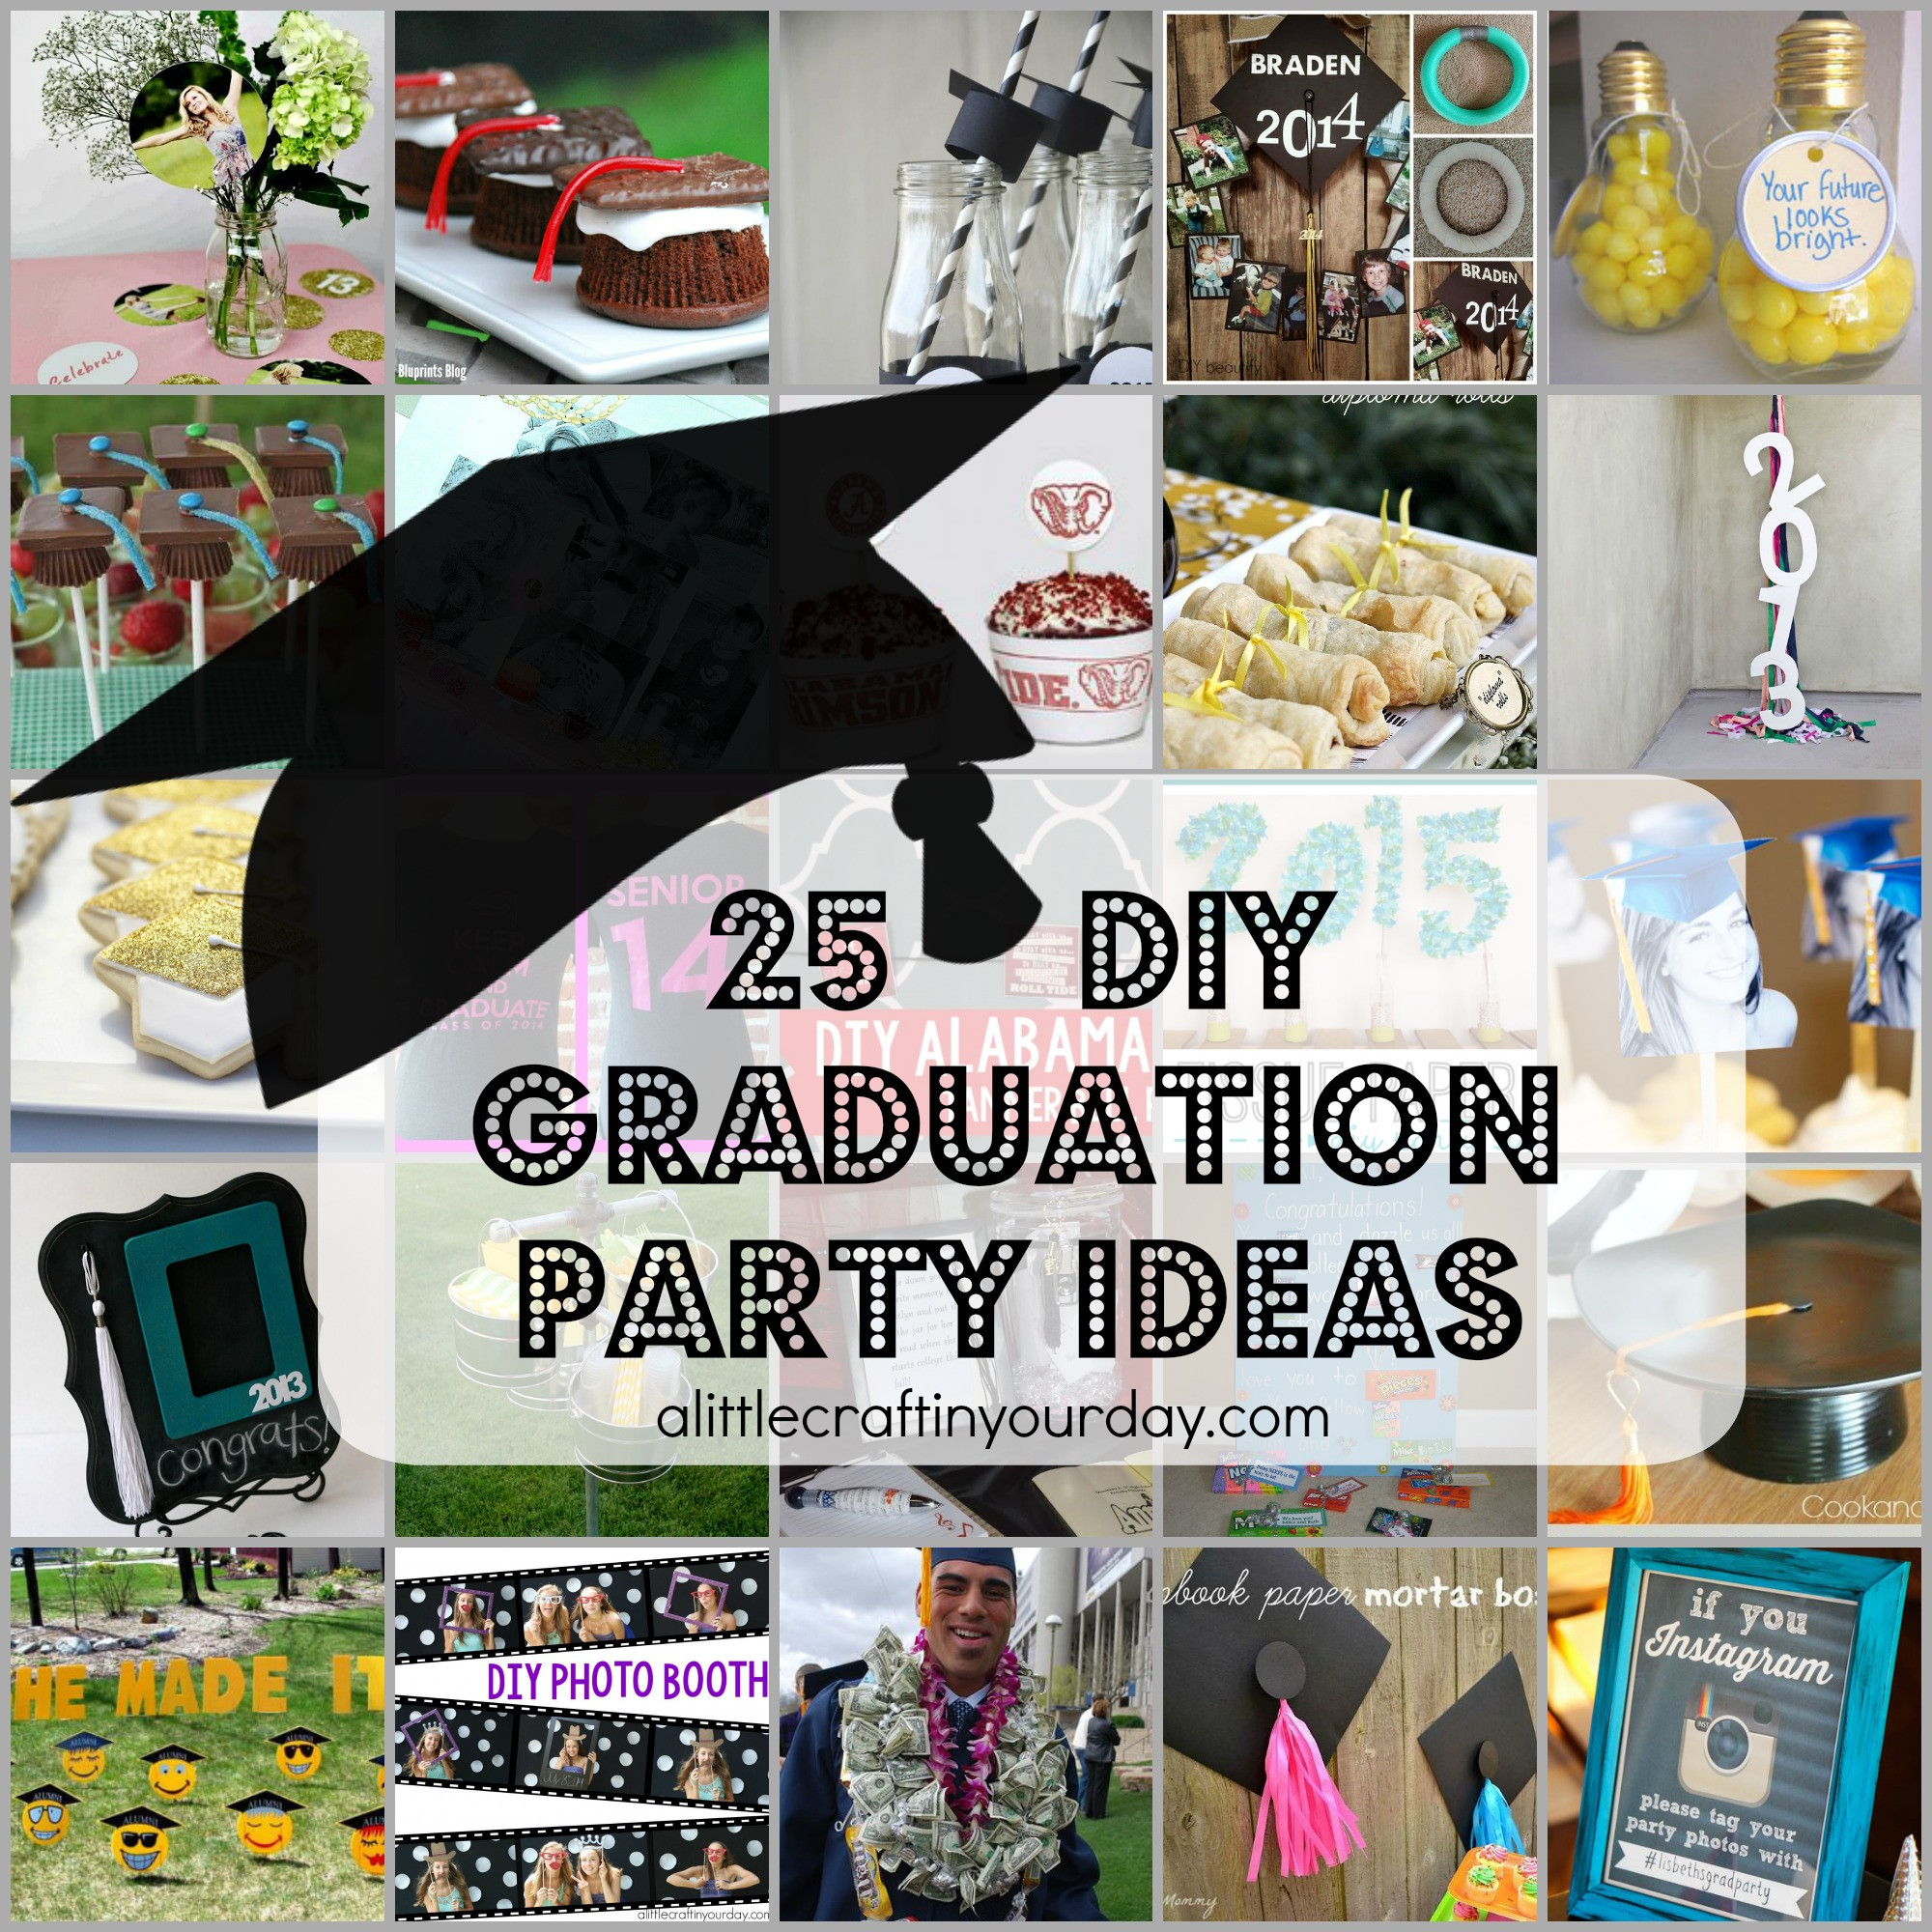 Hs Graduation Party Ideas
 25 DIY Graduation Party Ideas A Little Craft In Your Day